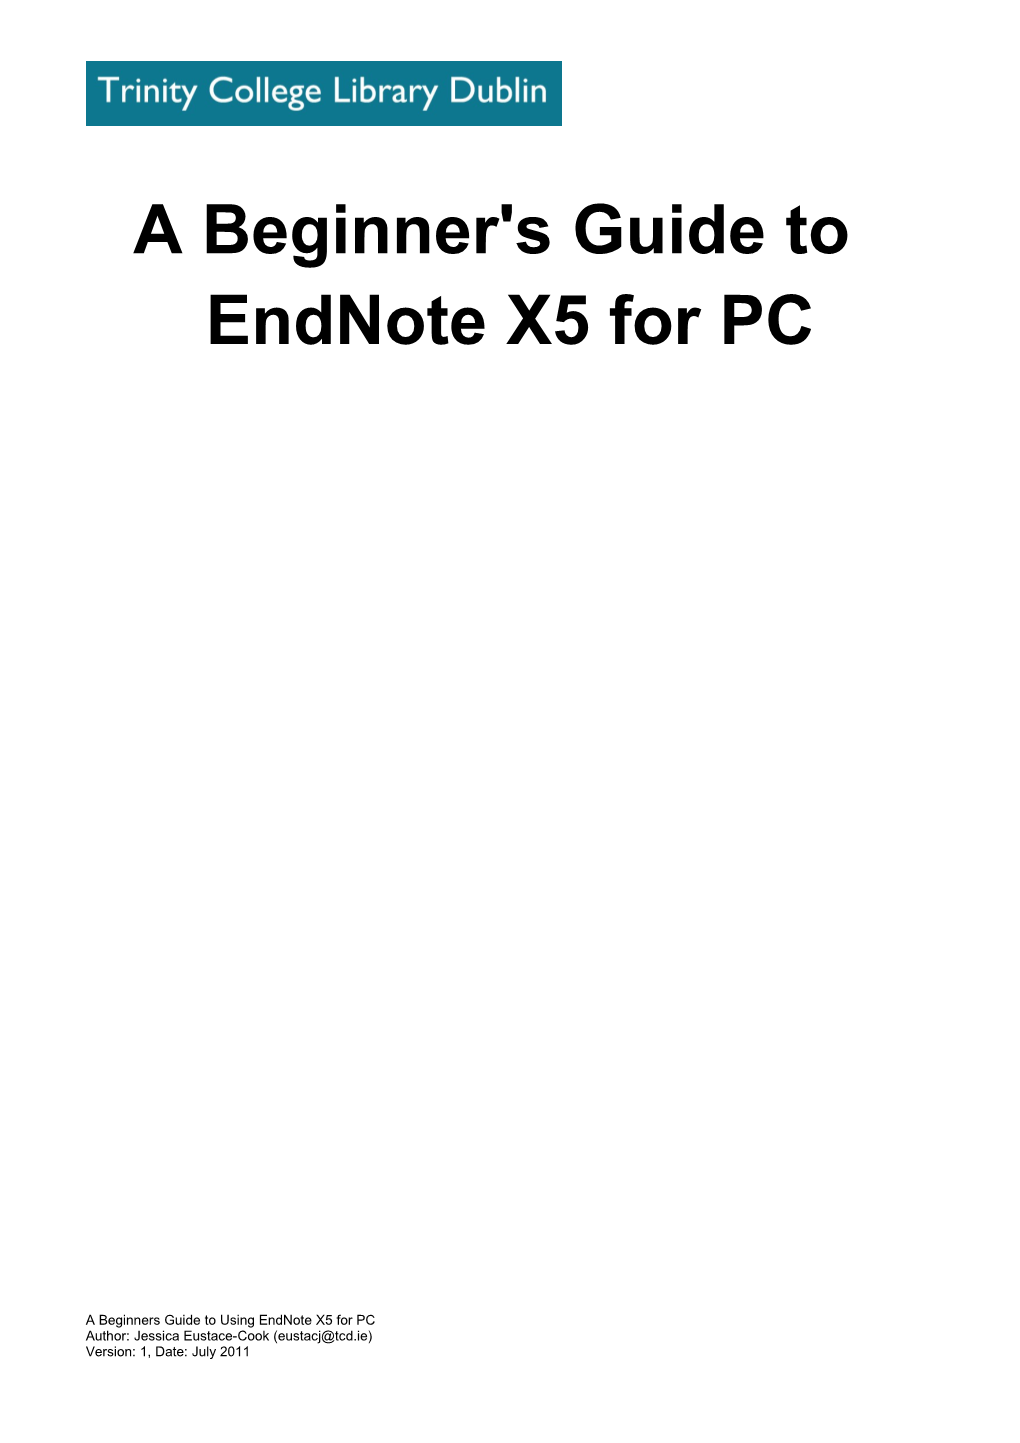 A Beginner's Guide to Endnote X5 for PC